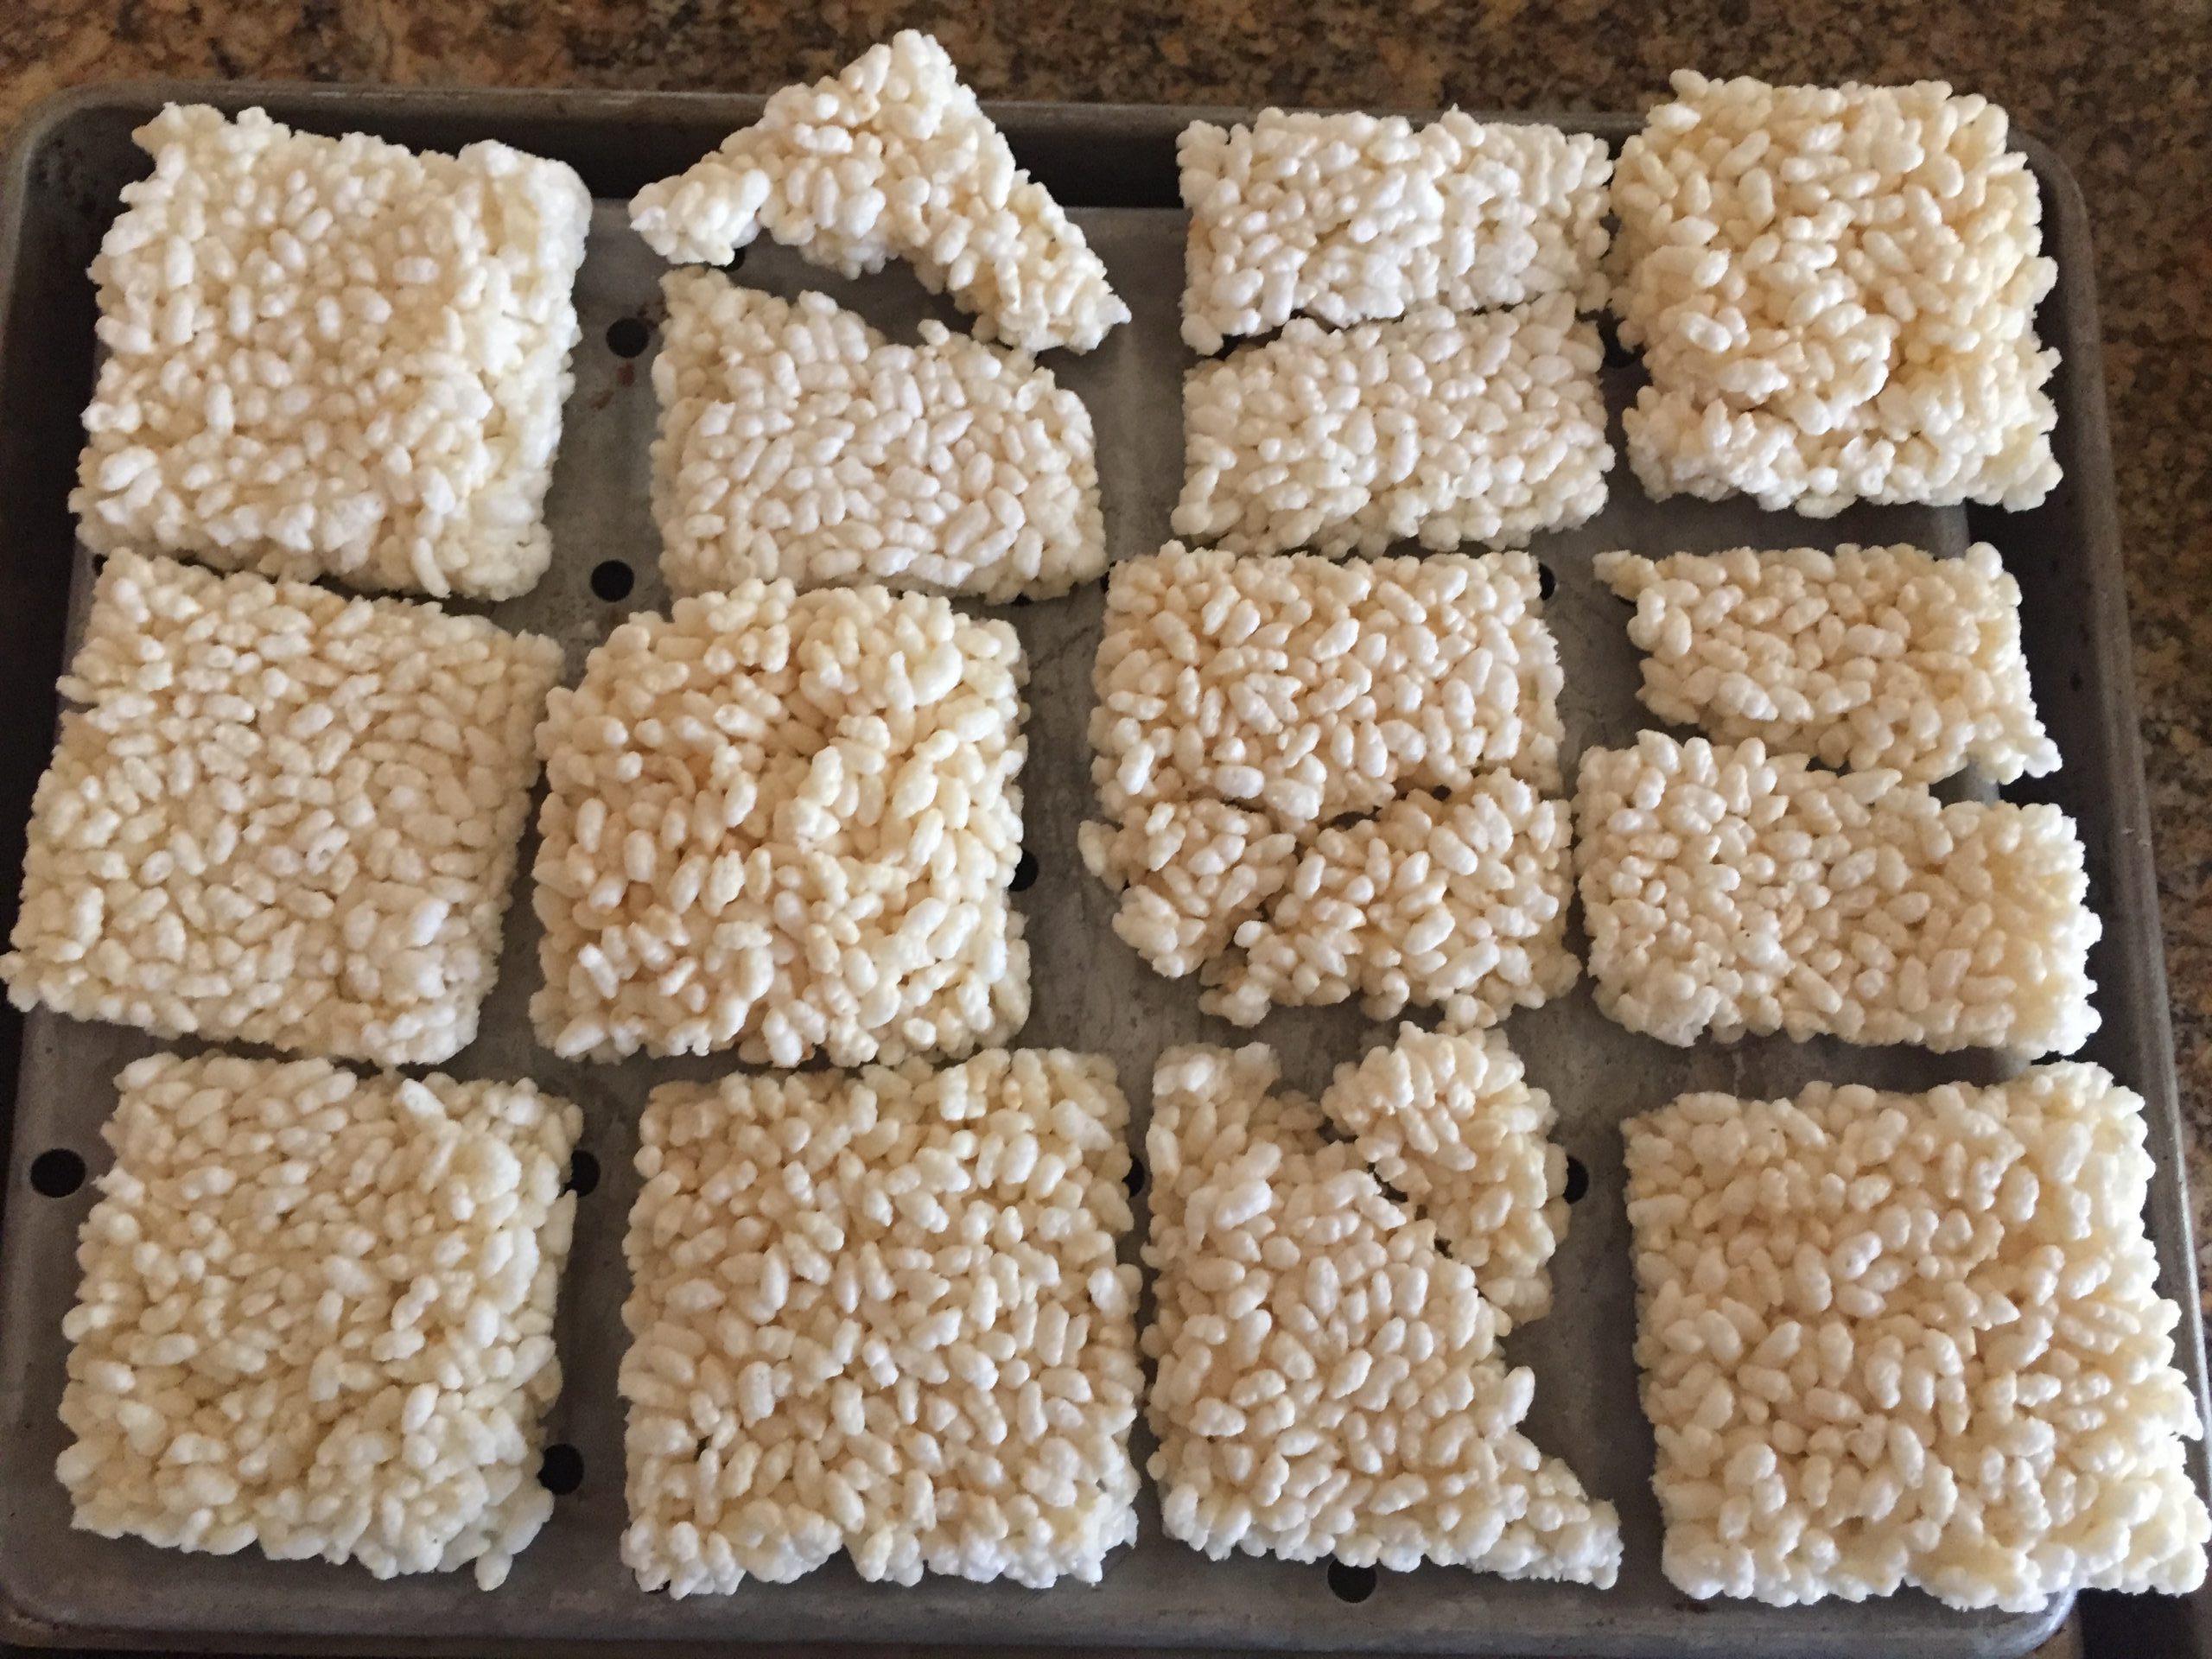 Rice cakes on a baking tray